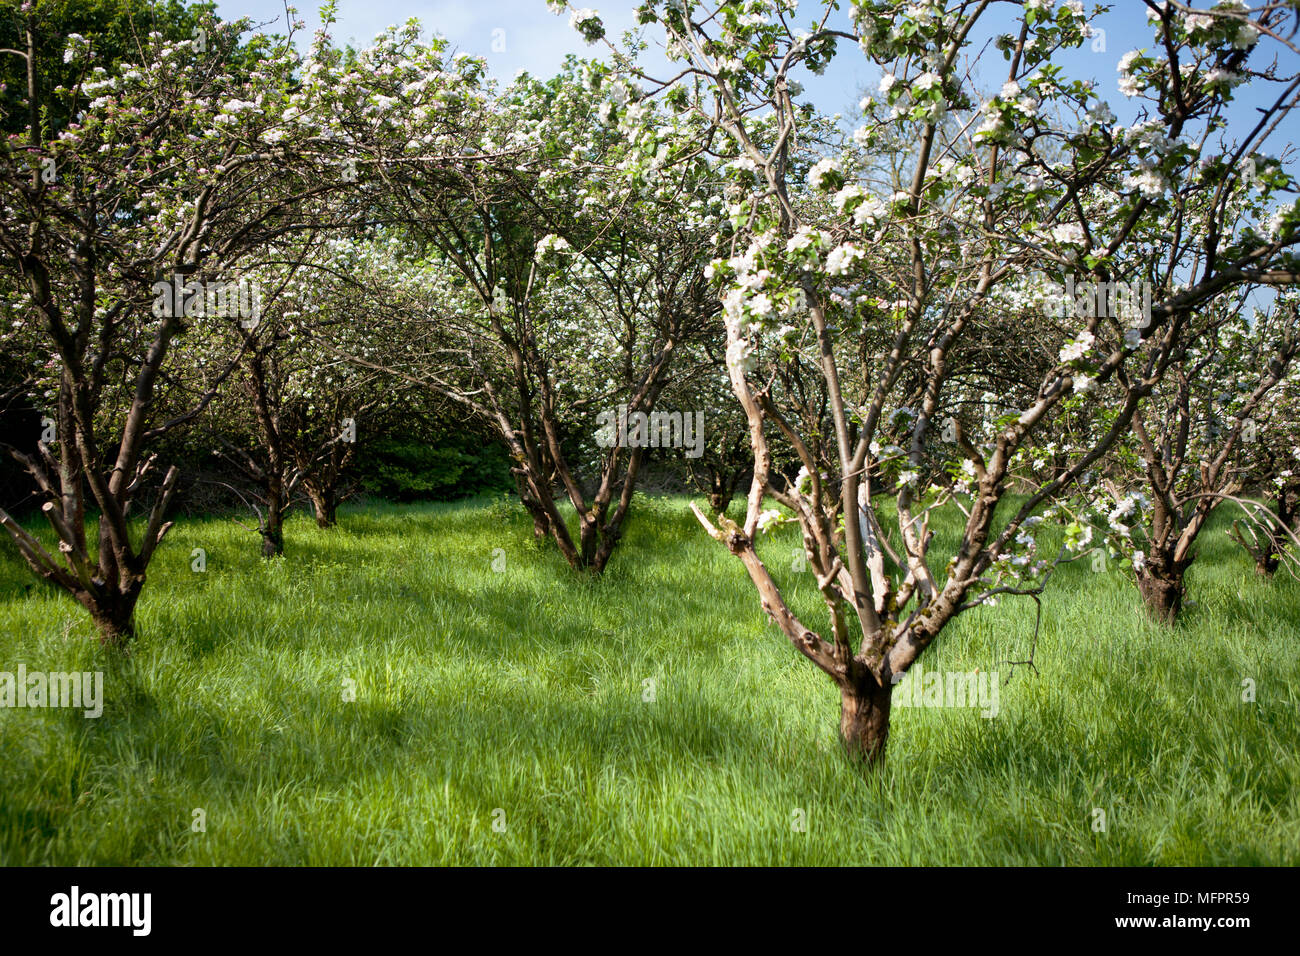 The West Orchard in Fairfield, Bedfordshire, UK, a historic orchard containing rare varieties of apple tree, now maintained by the local community Stock Photo